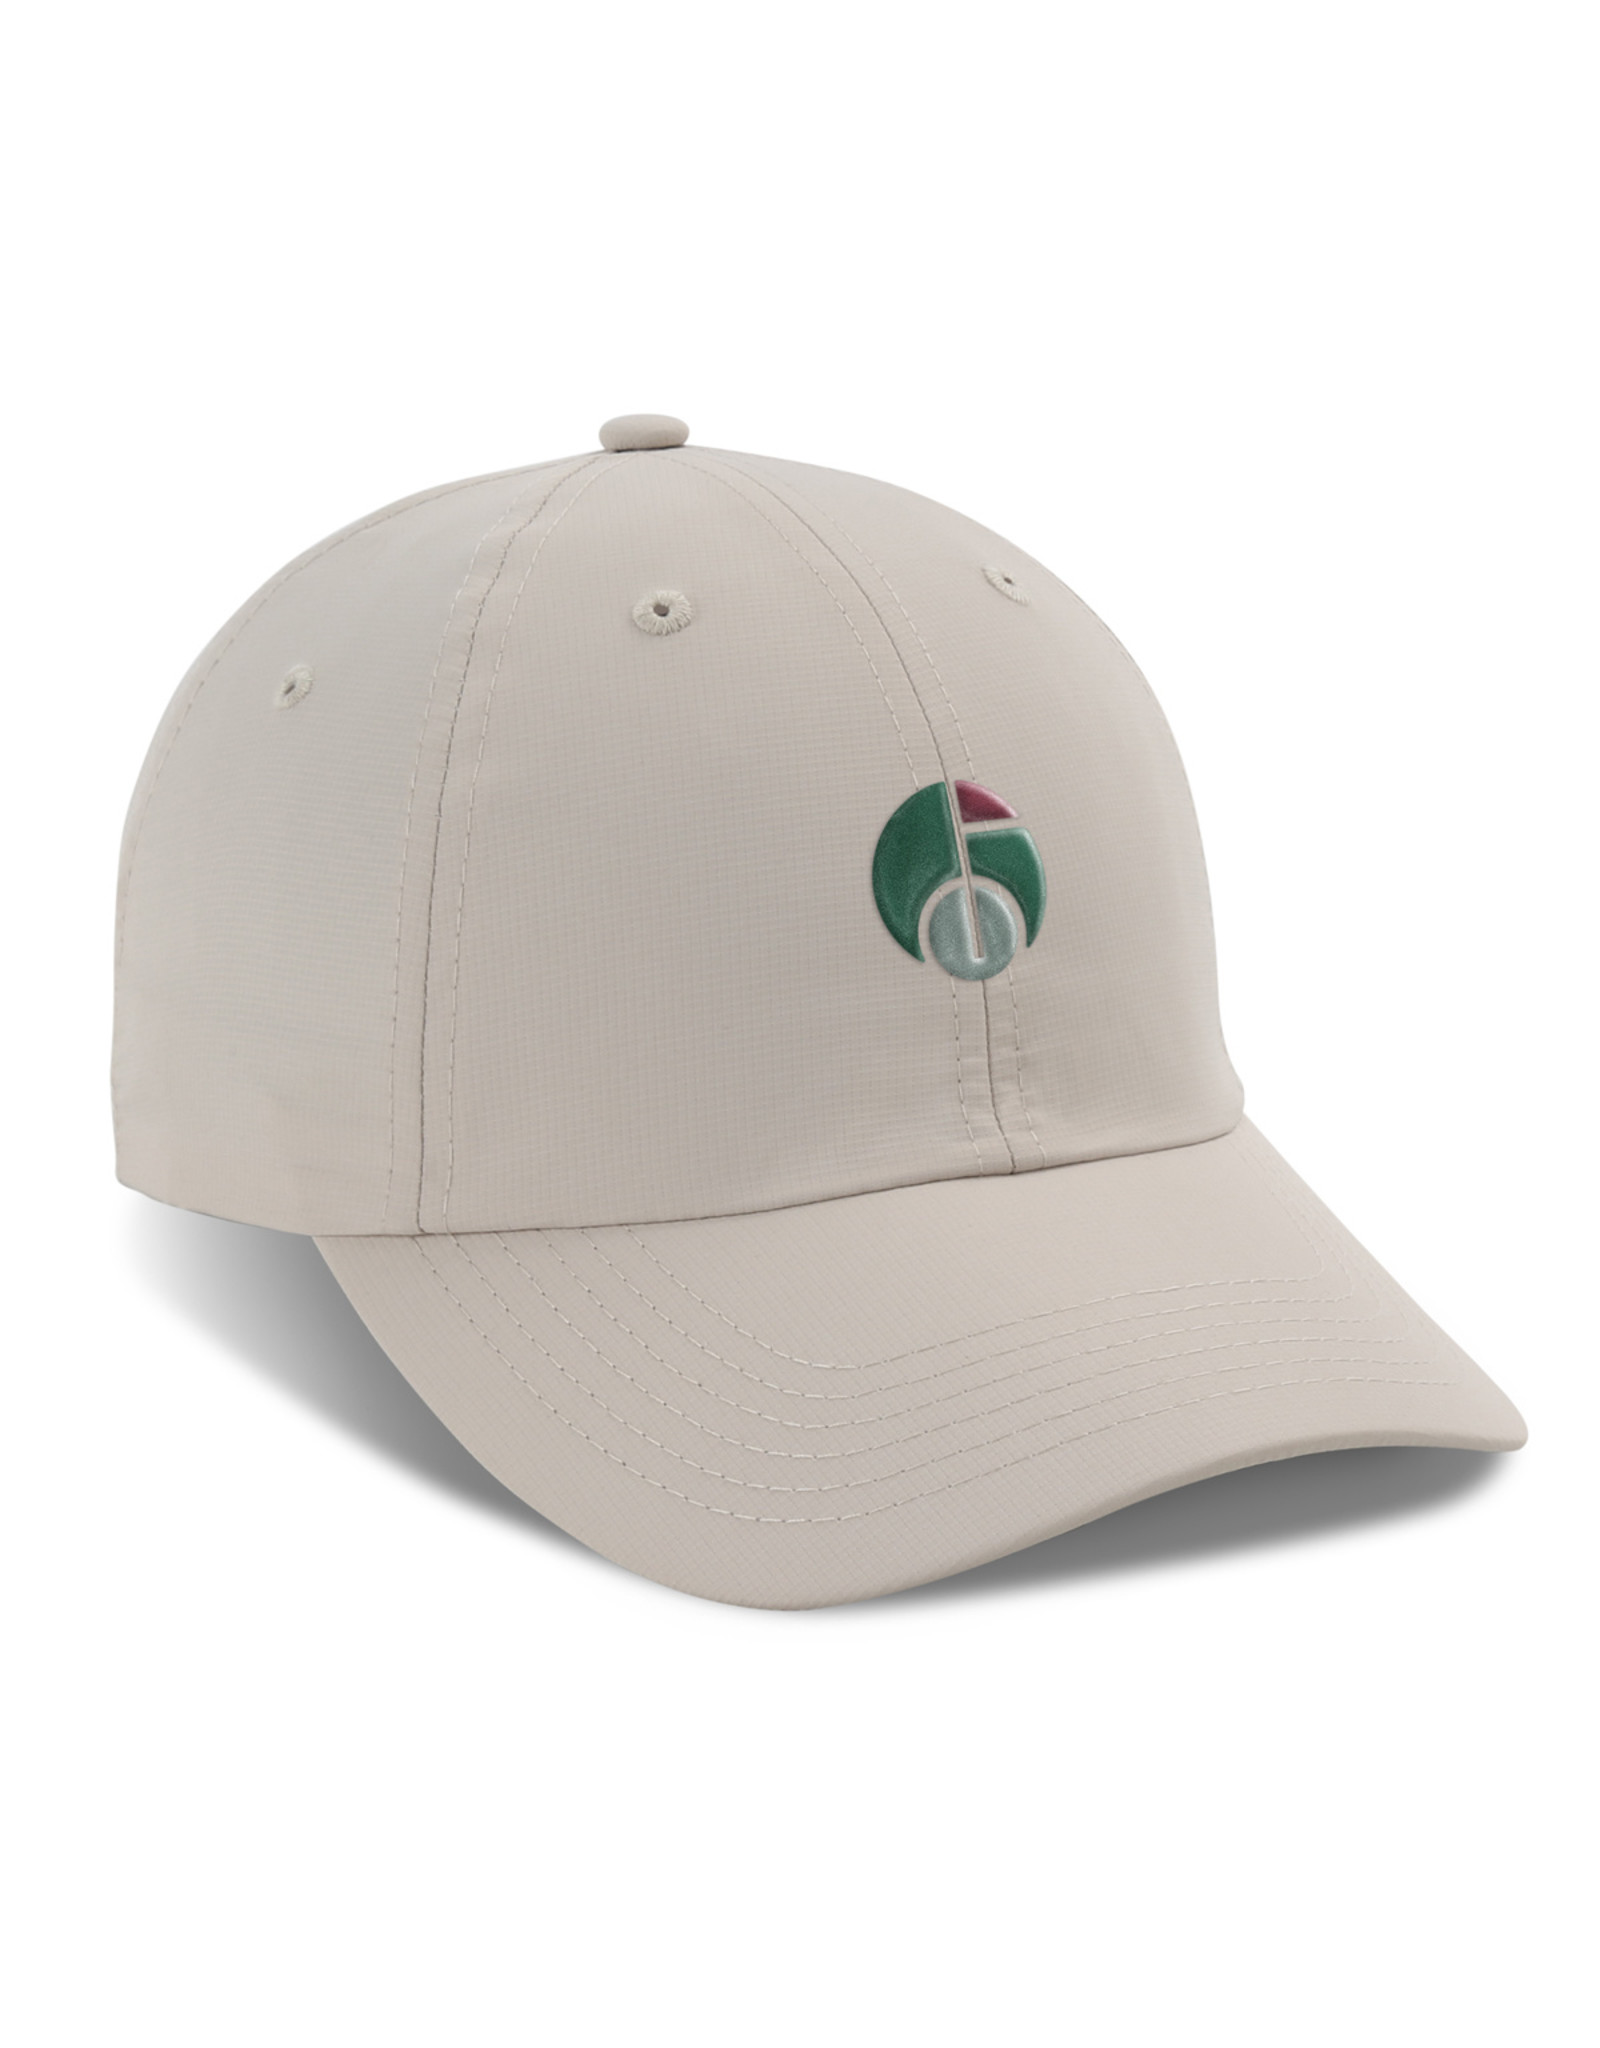 Imperial Headwear Imperial Lightweight Performance Hat - Putty